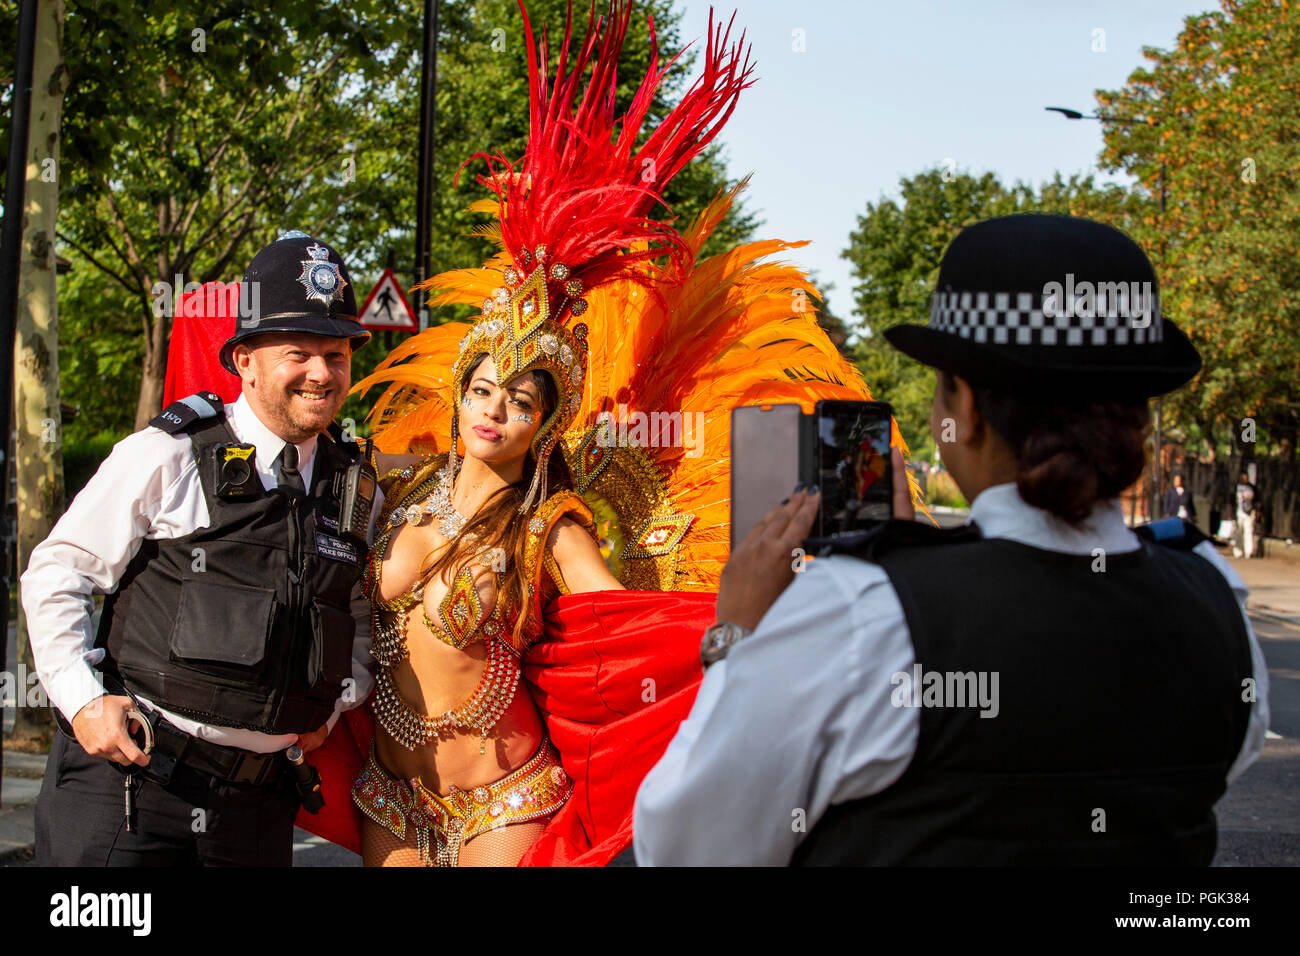 London, United Kingdom. 27 August 2018. A dancer from the Paraiso School of Samba poses with police constable Gary Hitchman from the Metropolitian Police before the parade at Notting Hill Carnival, Europe's largest street party.  Photo: Bettina Strenske/Alamy Live News Stock Photo